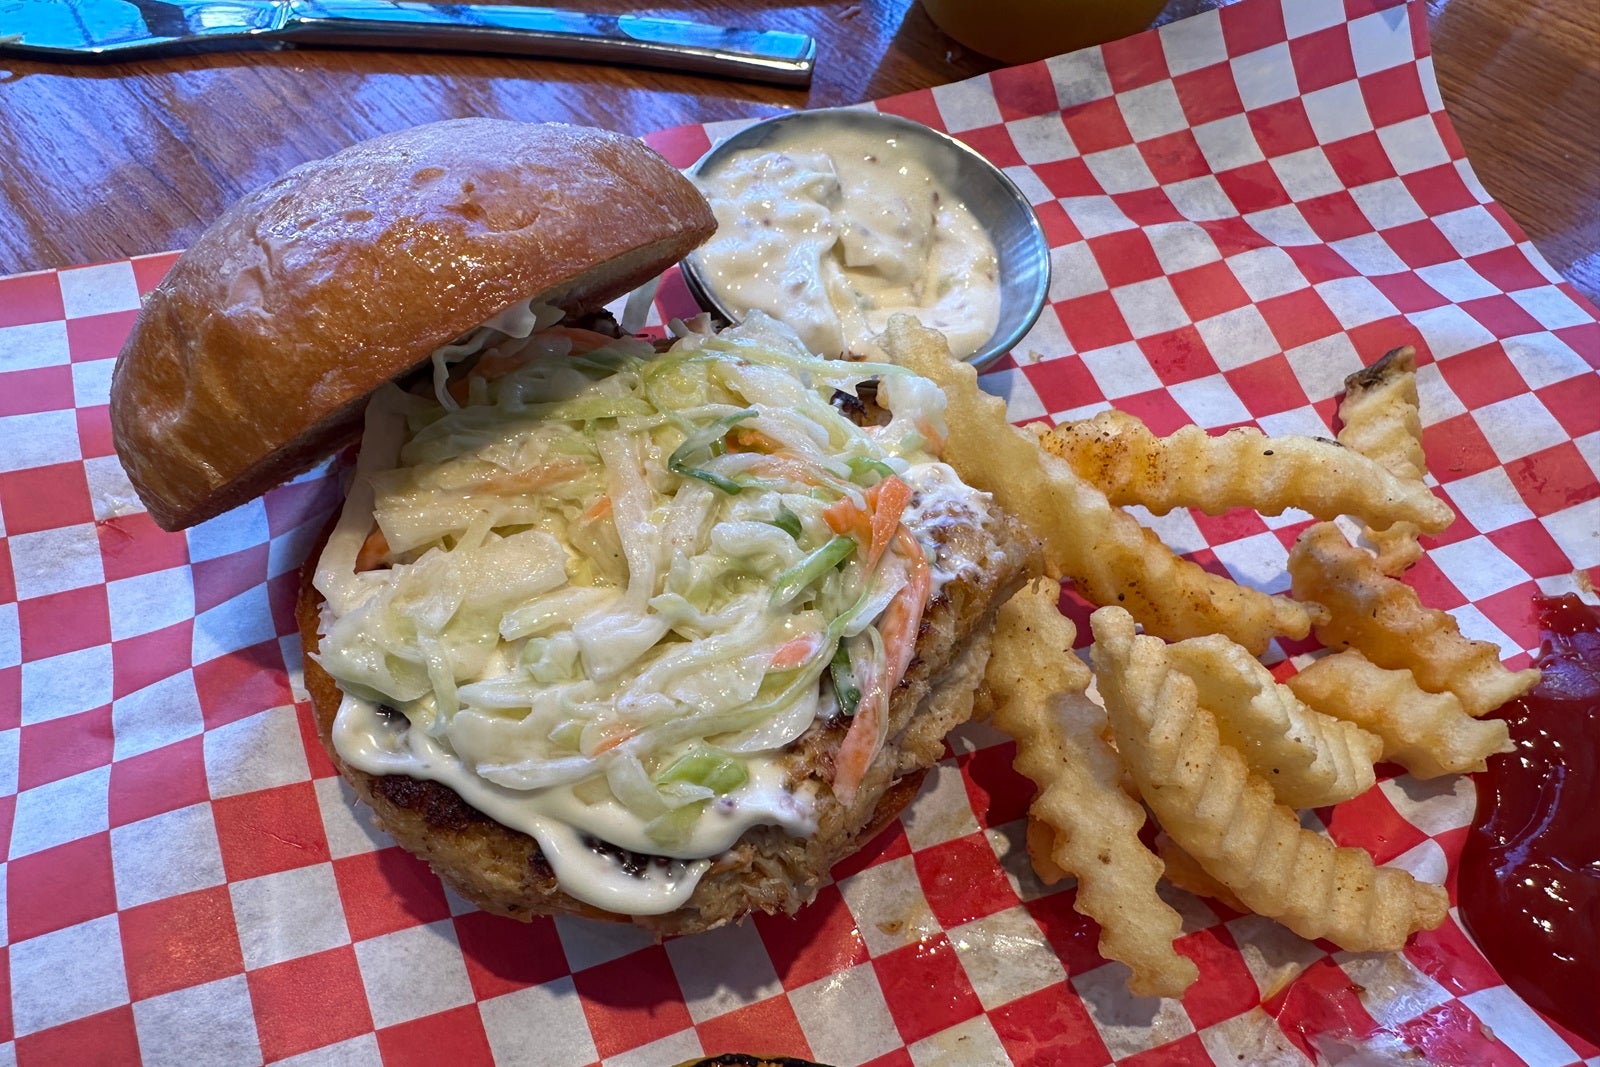 A crab cake topped with coleslaw on a bun with fries next to it on red and white checkered paper